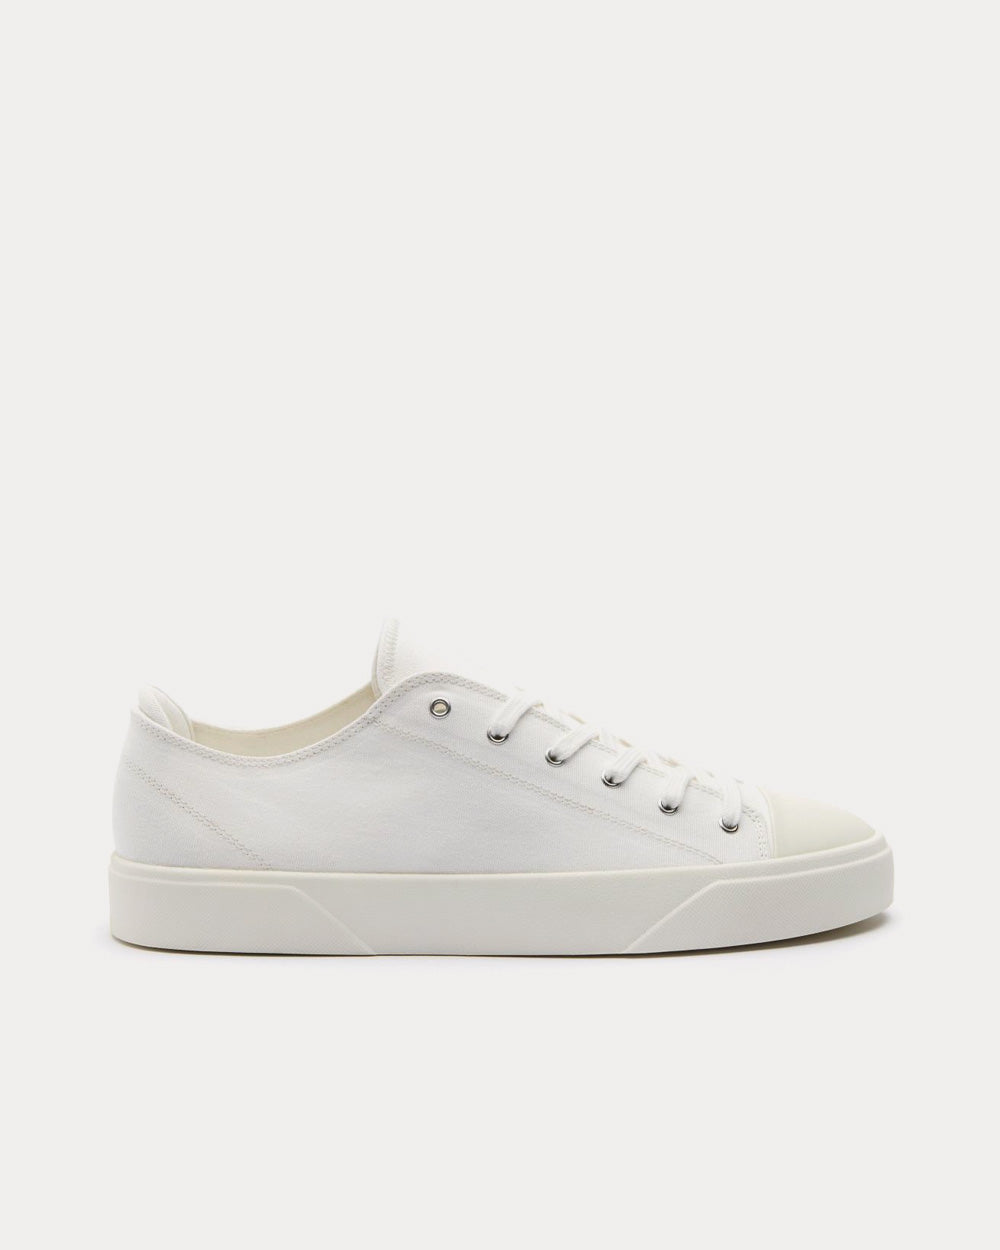 Vor - 1E Leinweiss White Low Top Sneakers